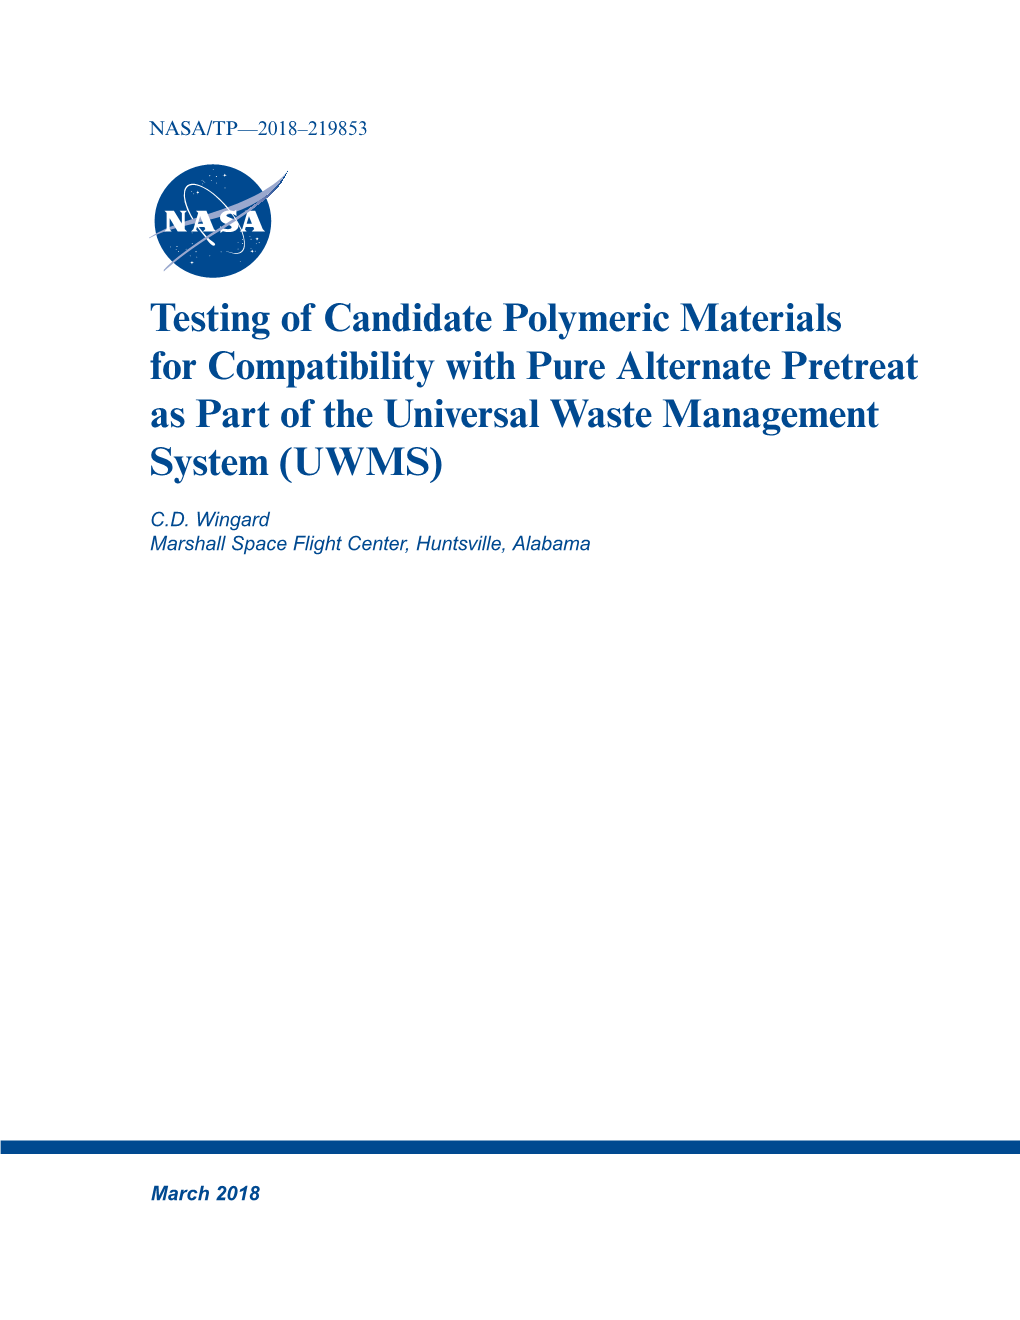 Testing of Candidate Polymeric Materials for Compatibility with Pure Alternate Pretreat As Part of the Universal Waste Management System (UWMS)